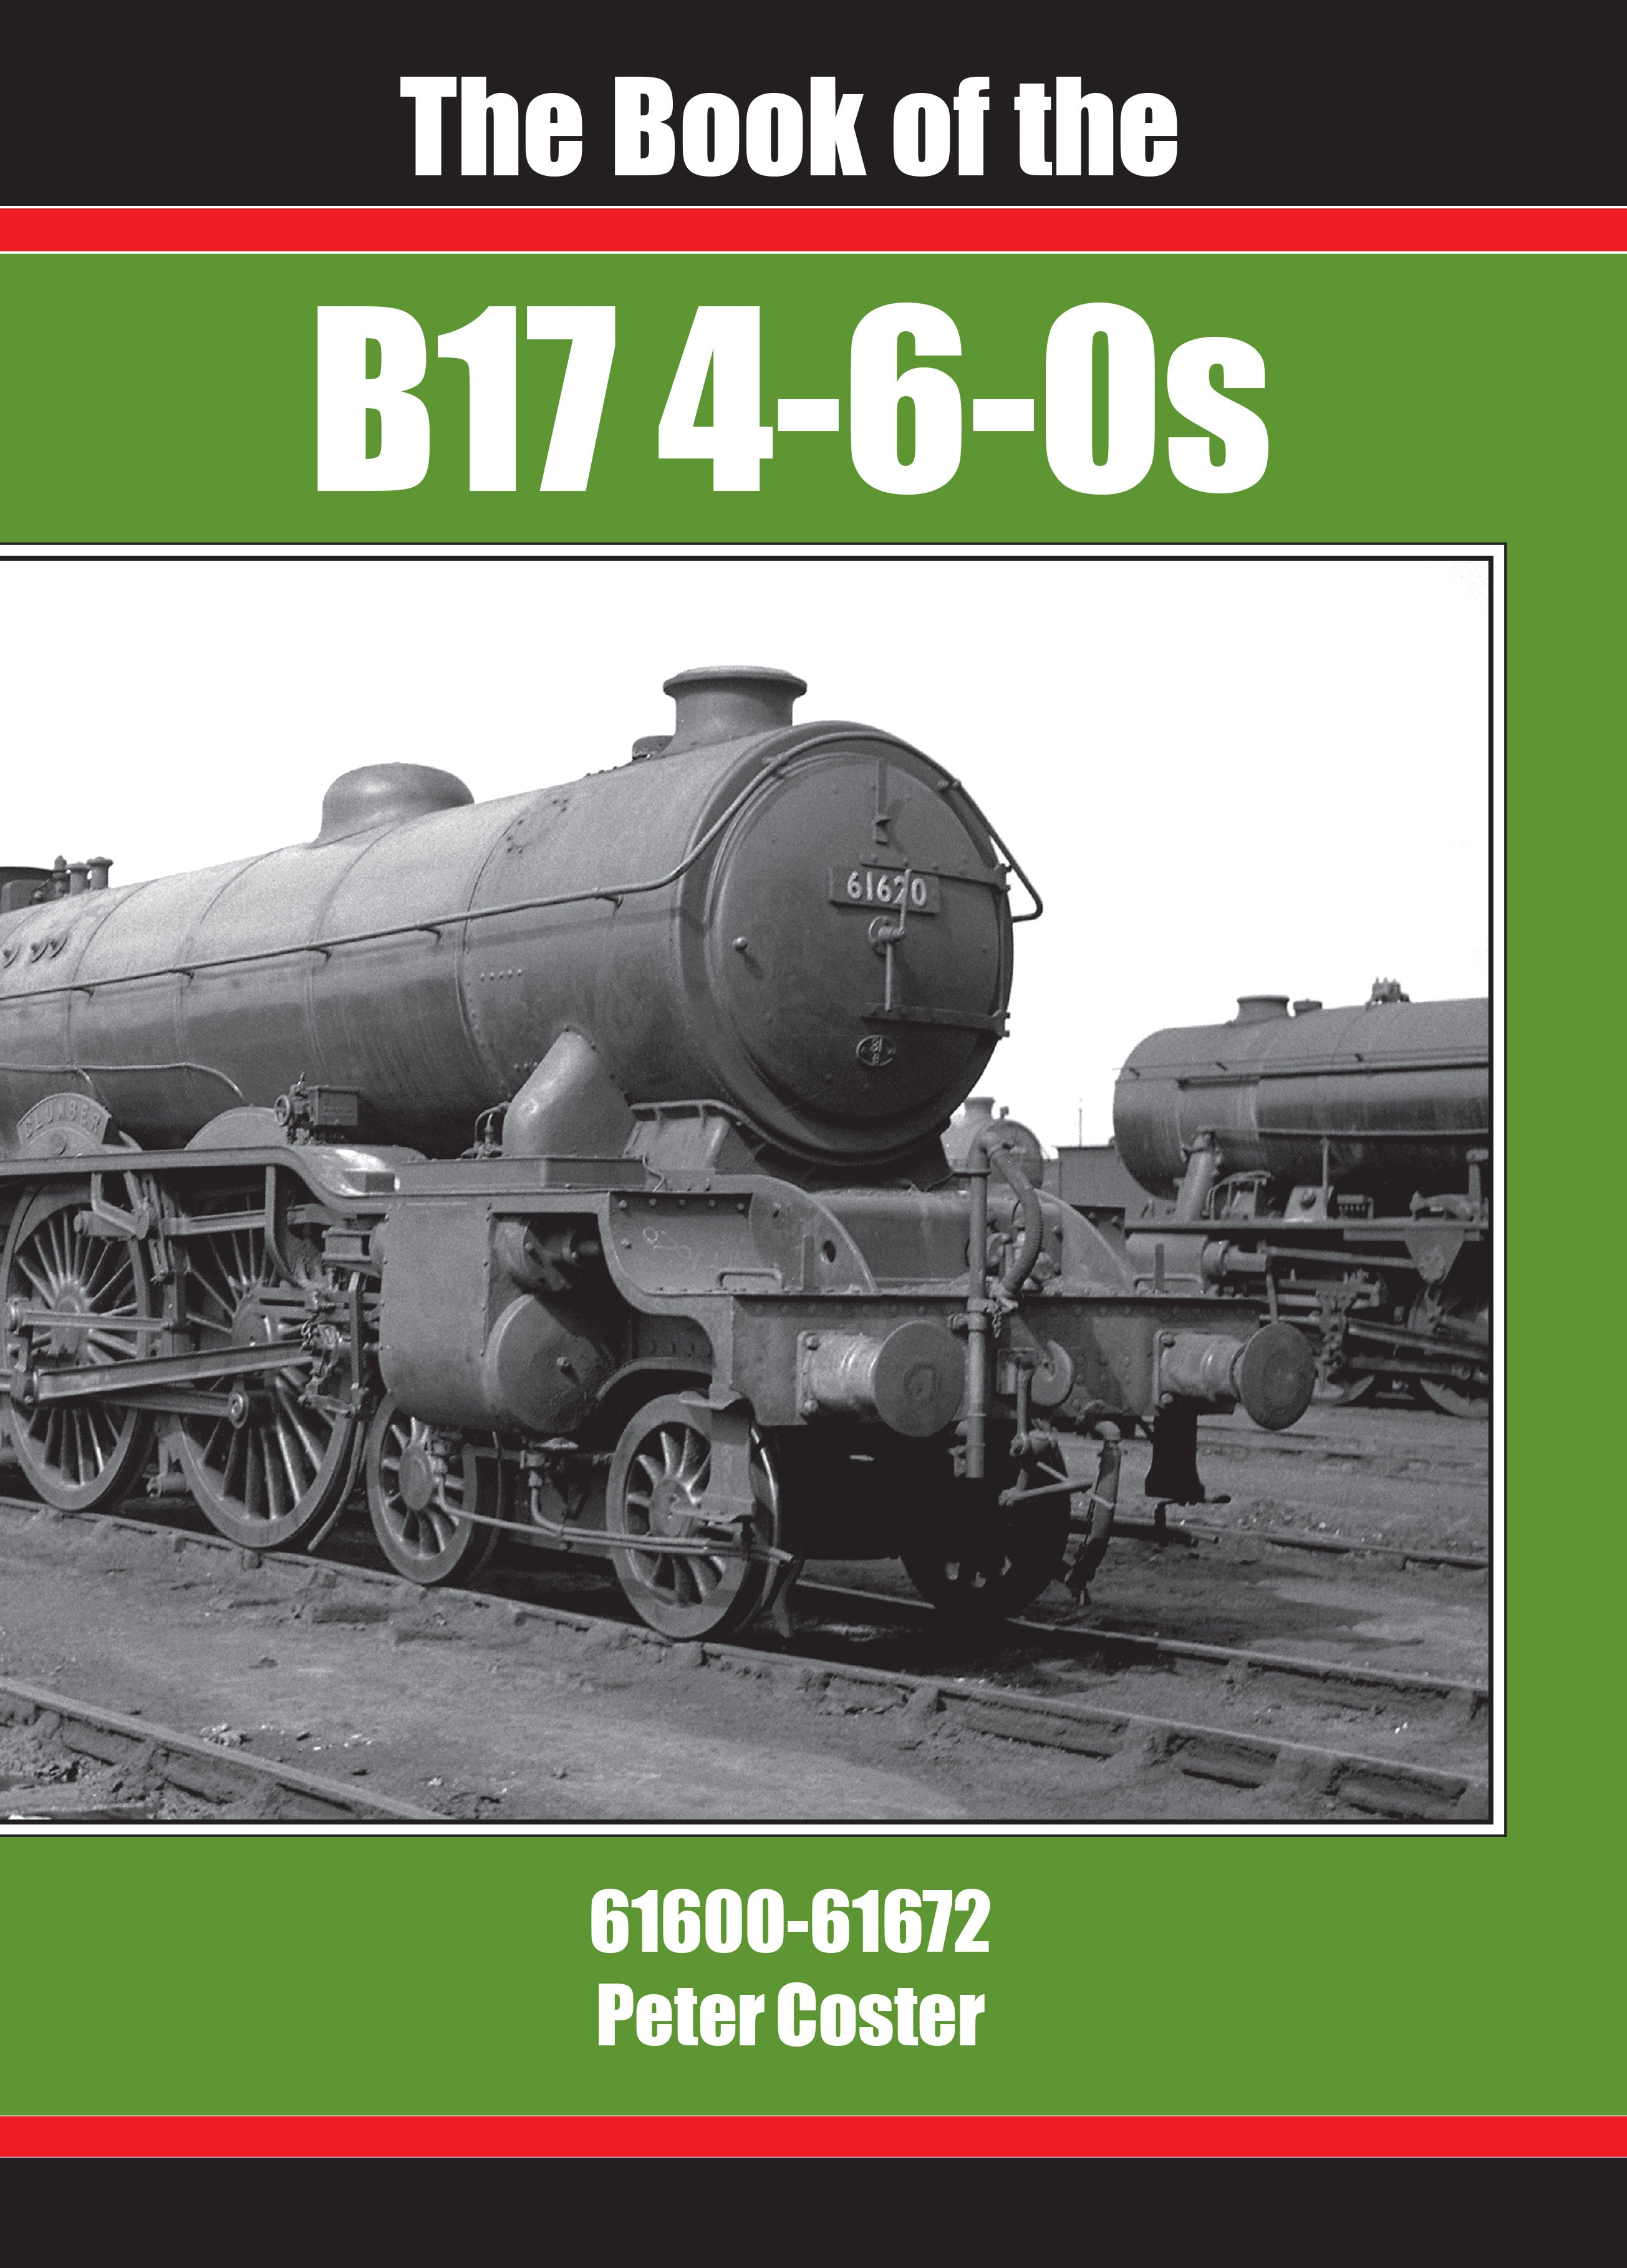 The Book of the B17 4-6-0s